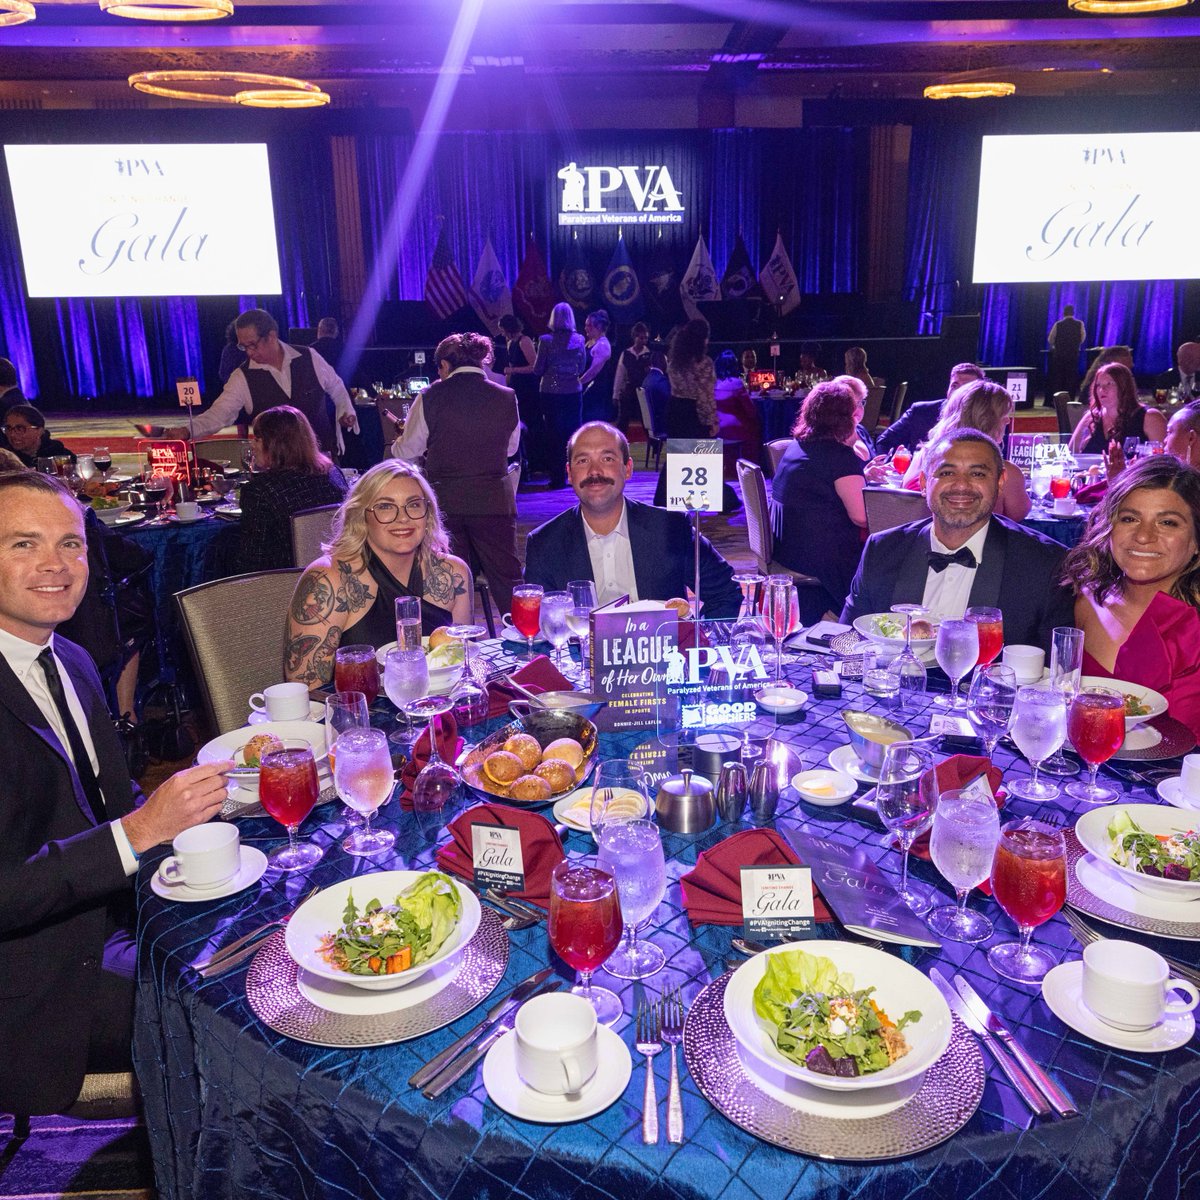 Do good, eat good! 🥩 PVA was thrilled to celebrate our new partner @GoodRanchers at our #PVAIgnitingChange Gala.

Learn more about our partnership to bring all #Veterans to the table: goodranchers.com/pva.